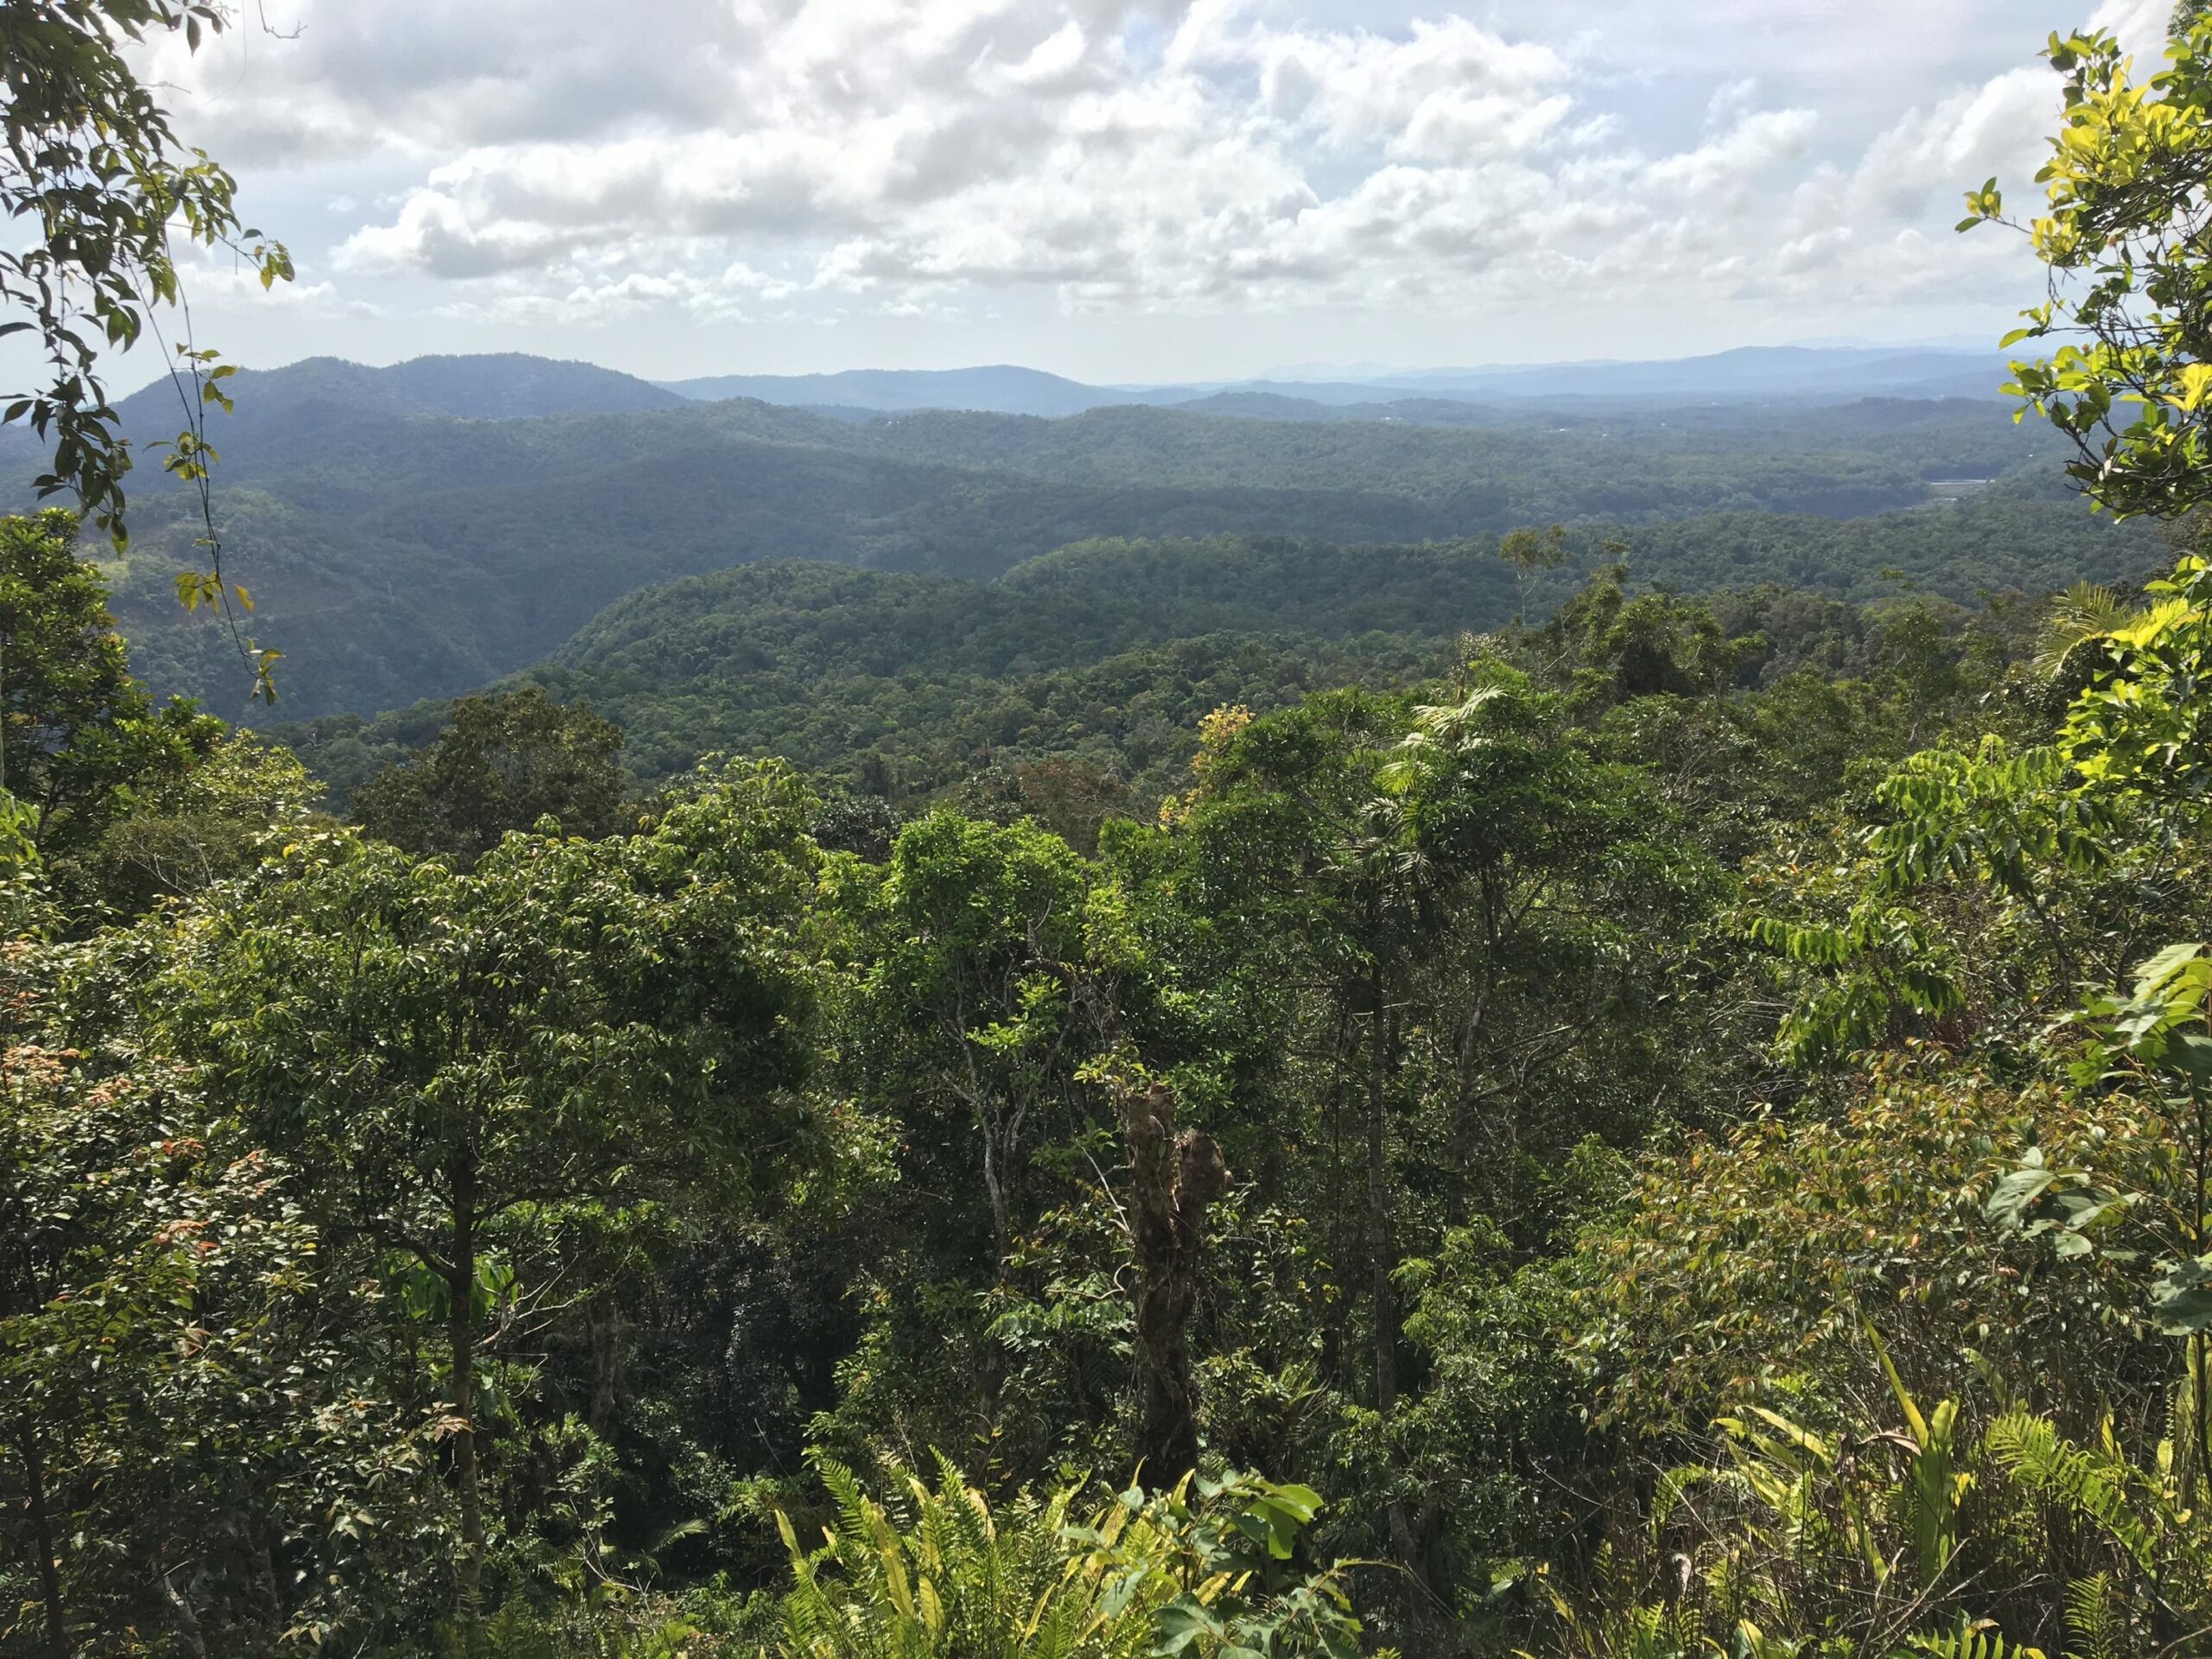 View from Skyrail coming down Macalister Range in Kuranda - Photo by Allen Rieland